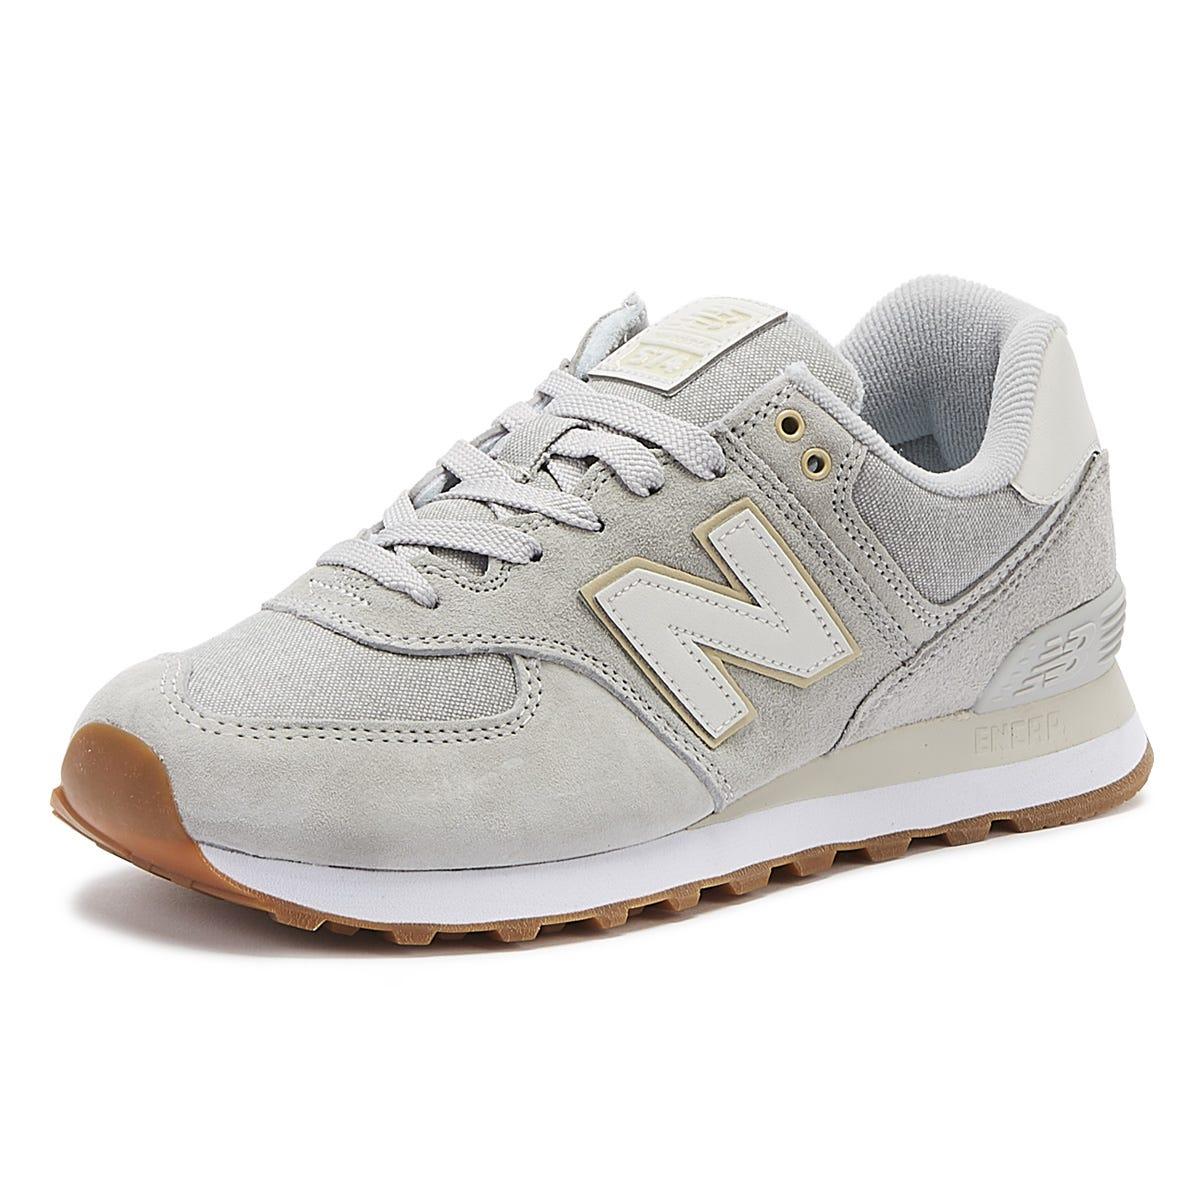 New Balance Suede 574 Rain Cloud Trainers in Grey (Gray) for Men - Lyst